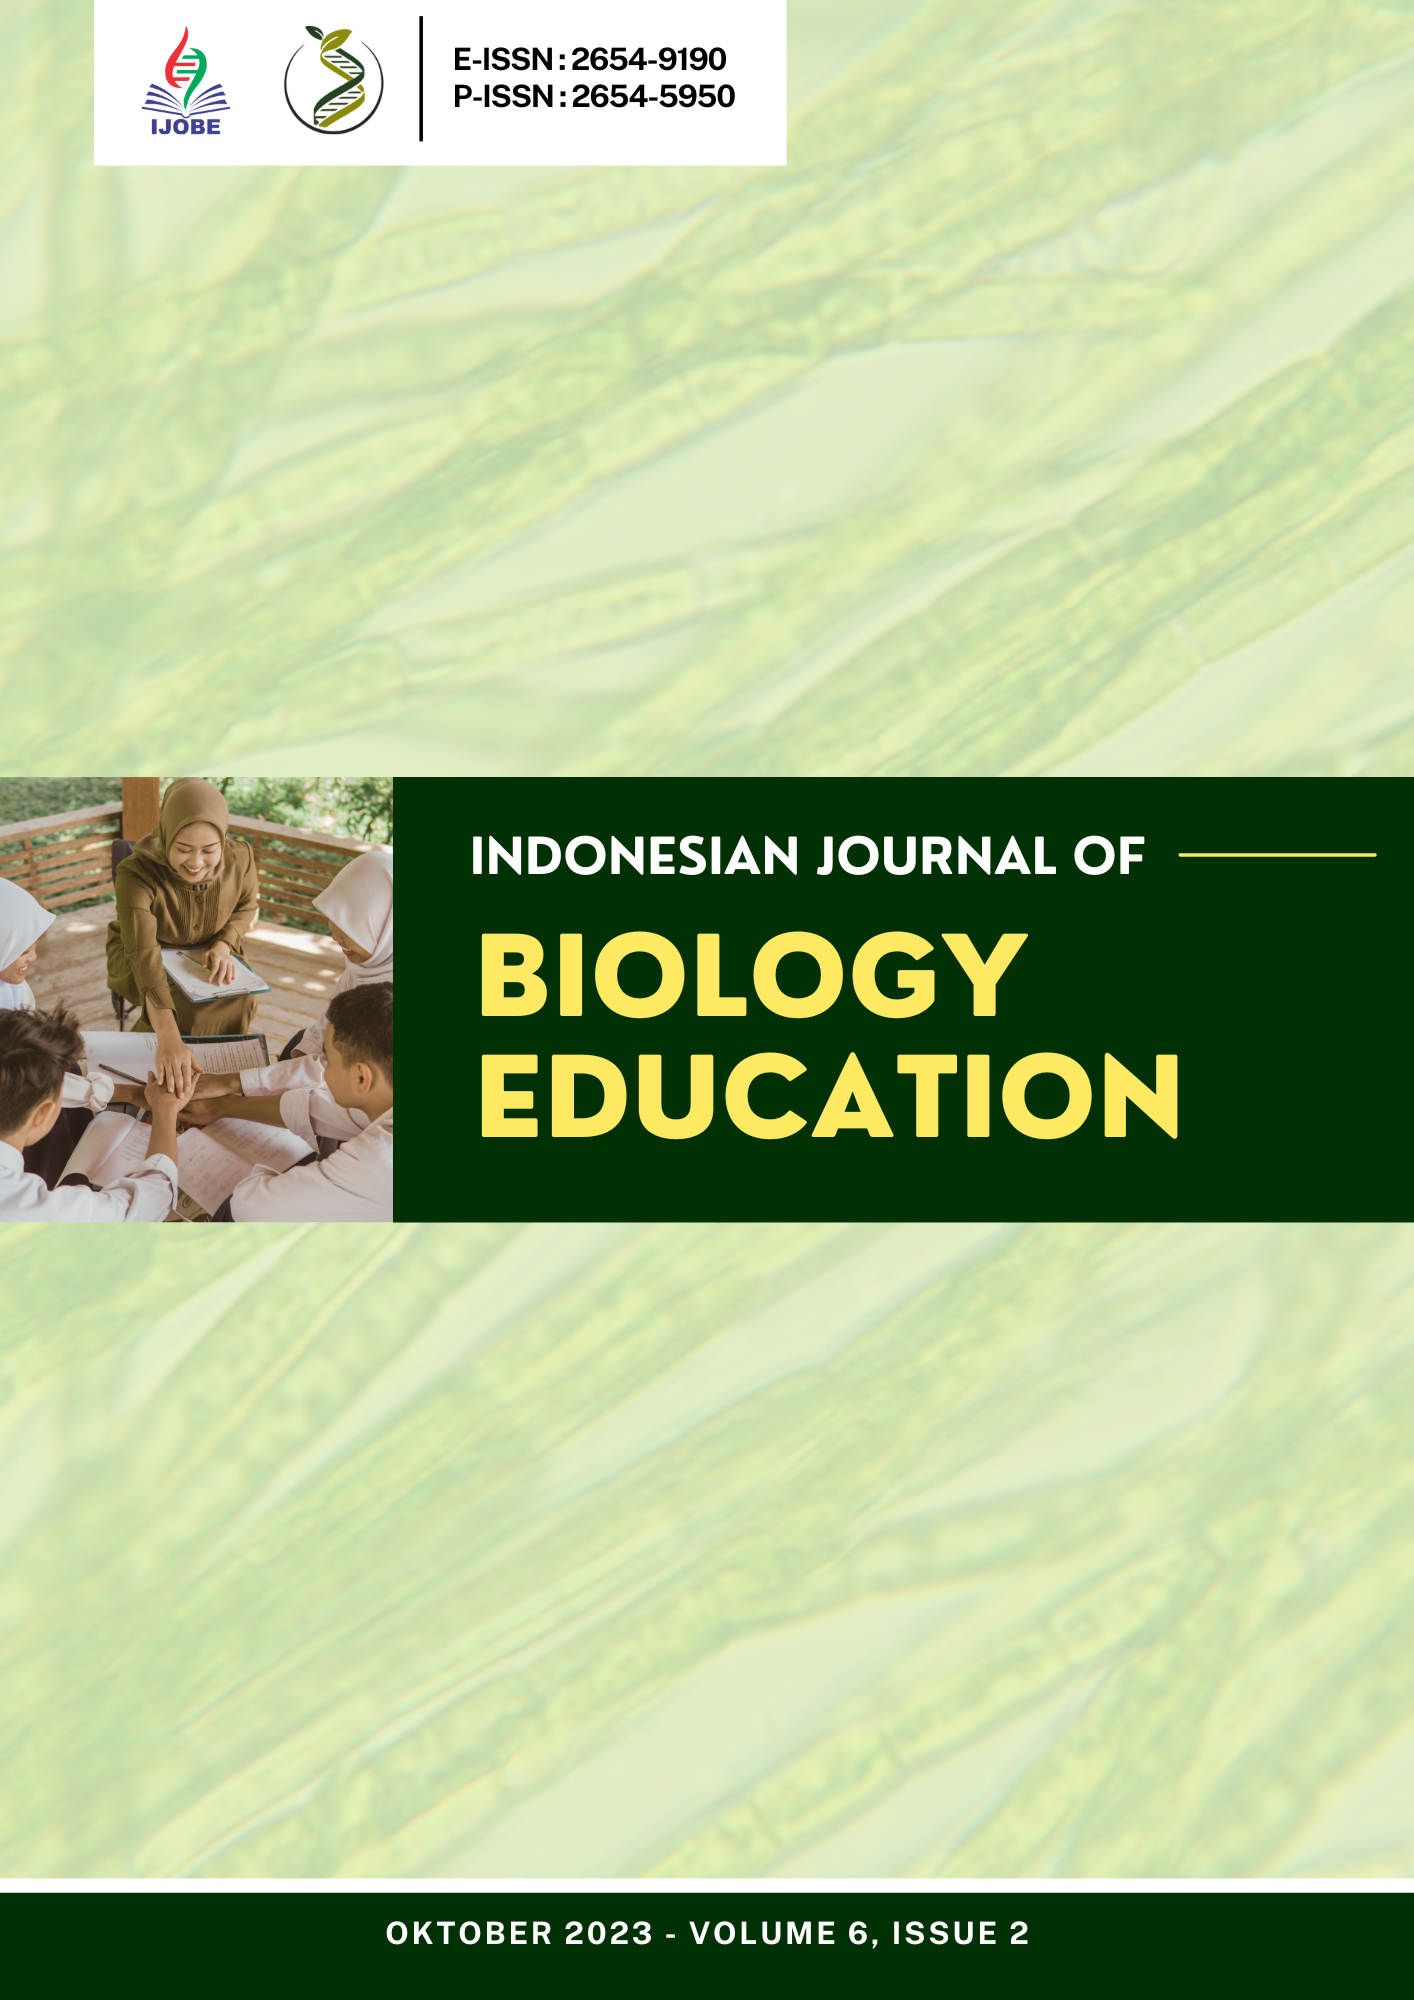 					View Vol. 6 No. 2 (2023): INDONESIAN JOURNAL OF BIOLOGY EDUCATION
				